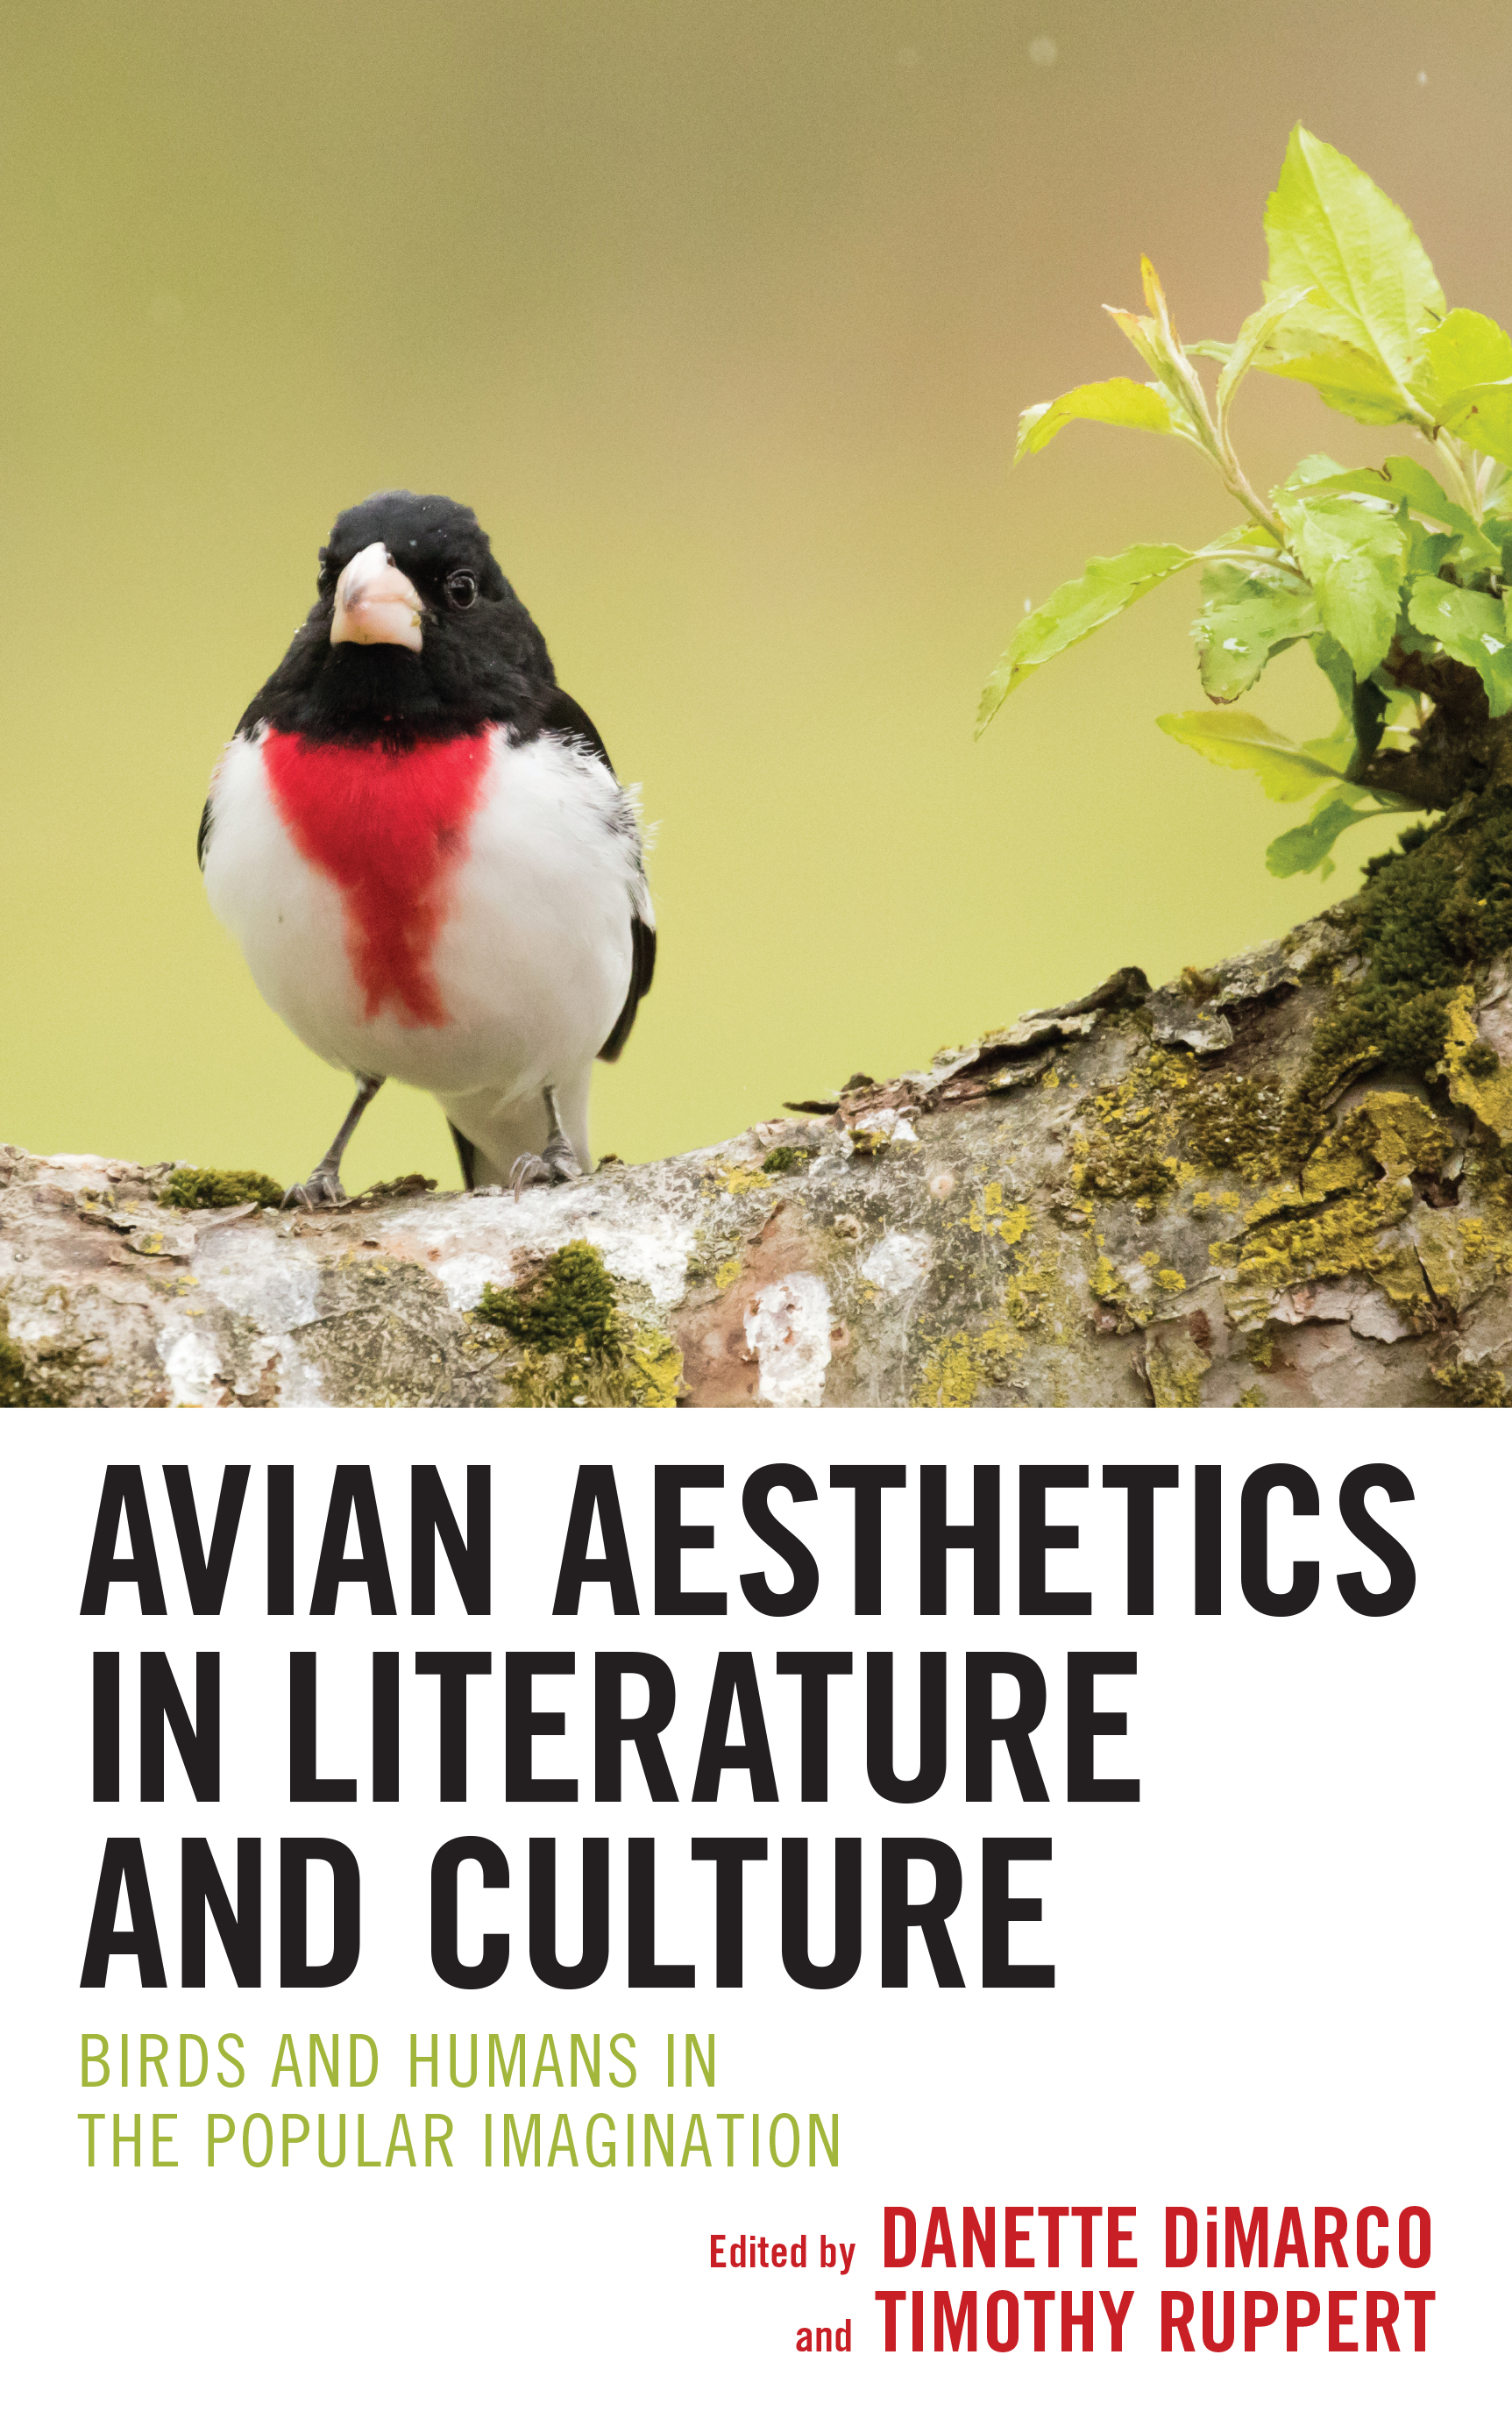 Avian Aesthetics in Literature and Culture: Birds and Humans in the Popular Imagination